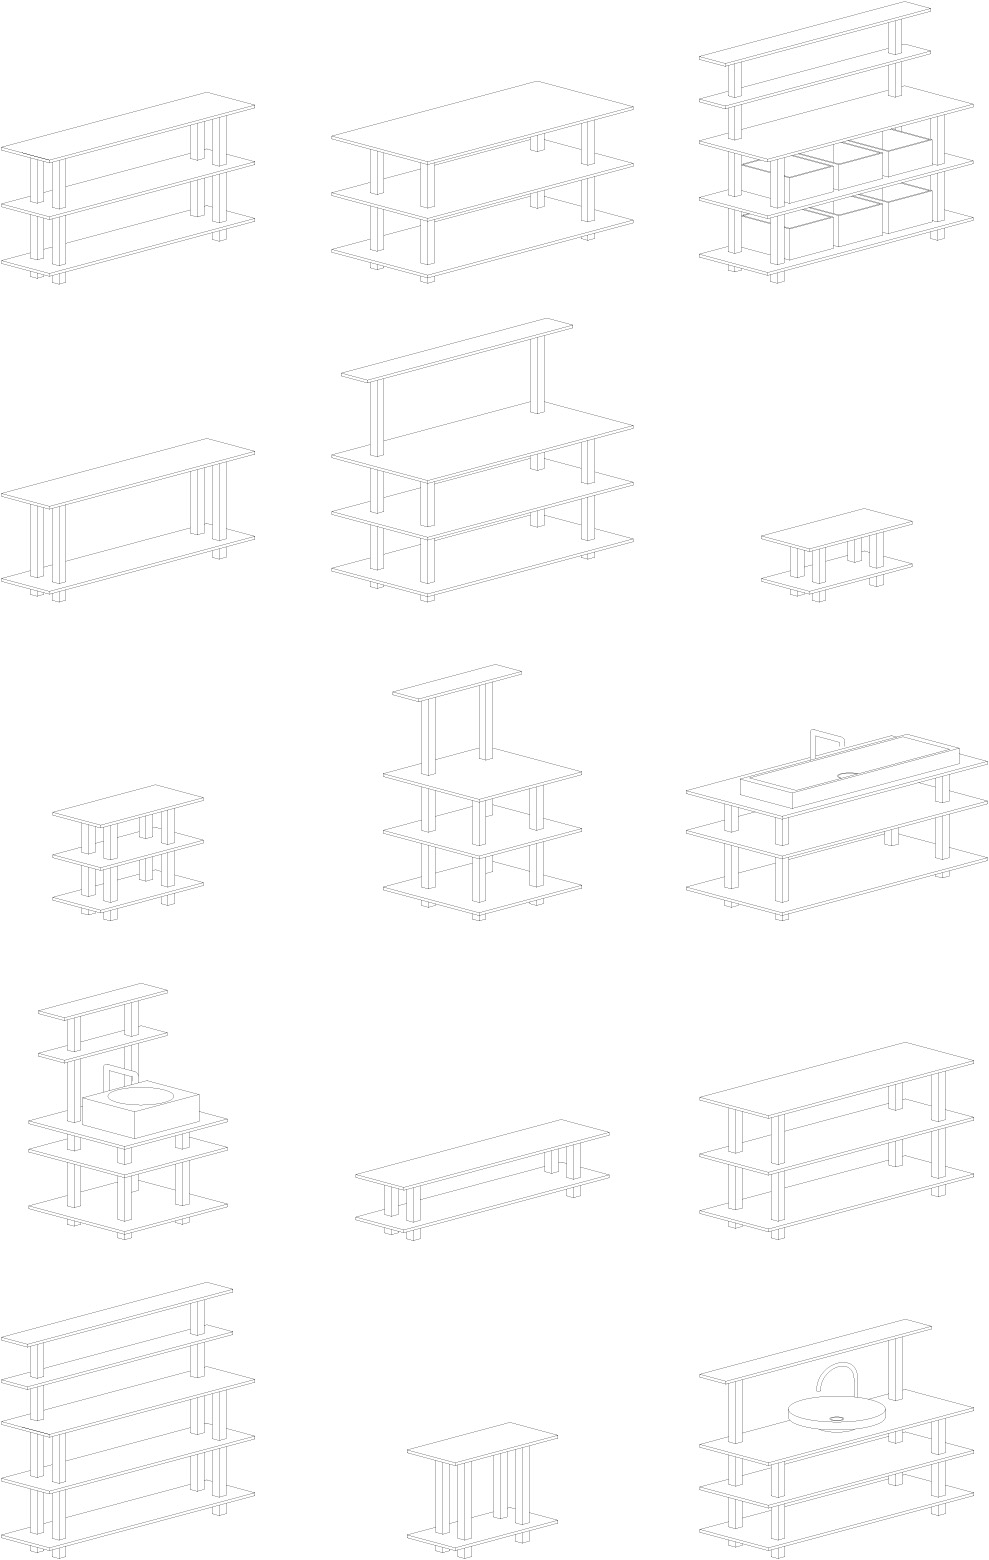 Exploded view of the solid oak elements that compose the PLATEFORME furniture